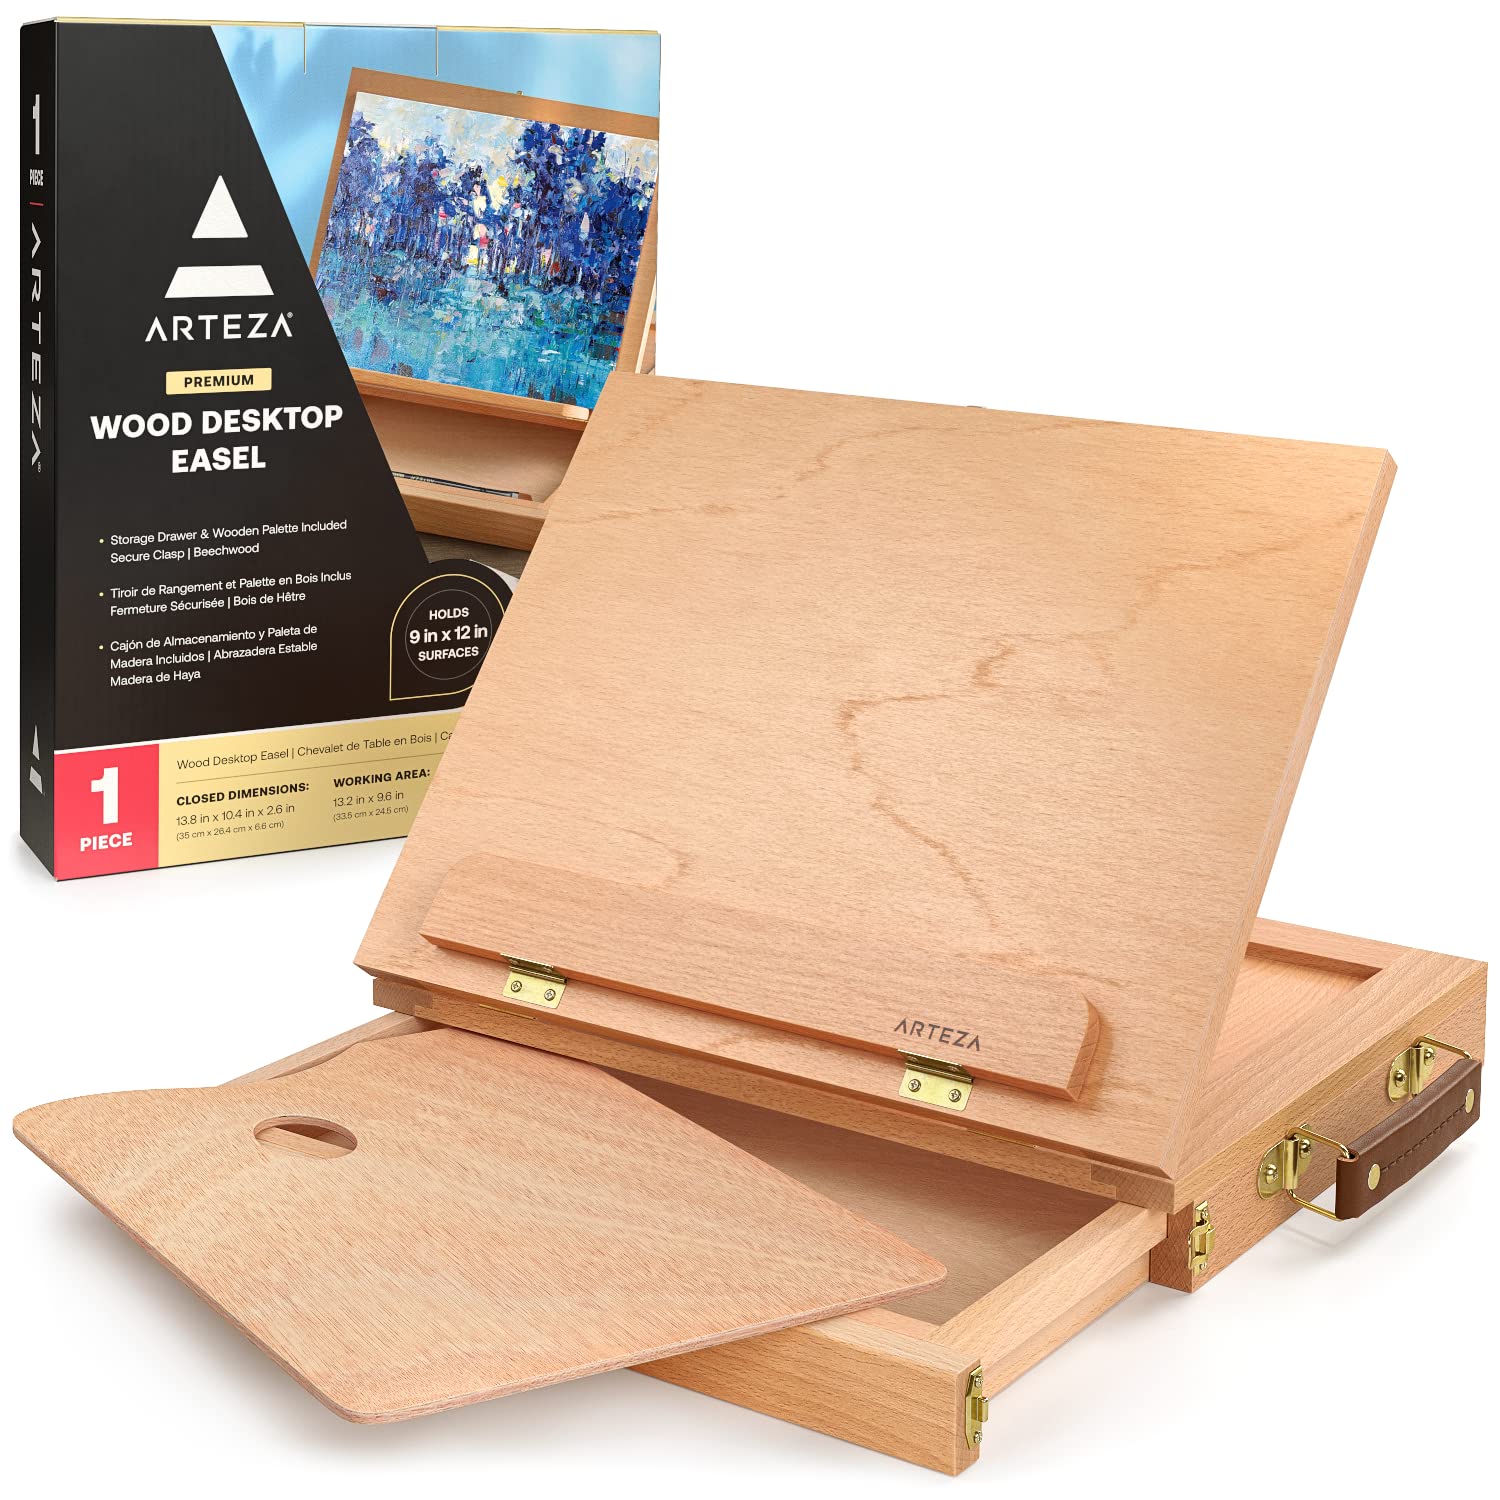 ARTEZA Tabletop Easel, 13.4 x 10.3 x 2 Inches, Portable Beechwood Easel Box with Single, Open-Compartment Drawer and Wooden Palette, Art Supplies Storage for Professional Artists and Hobby Painters